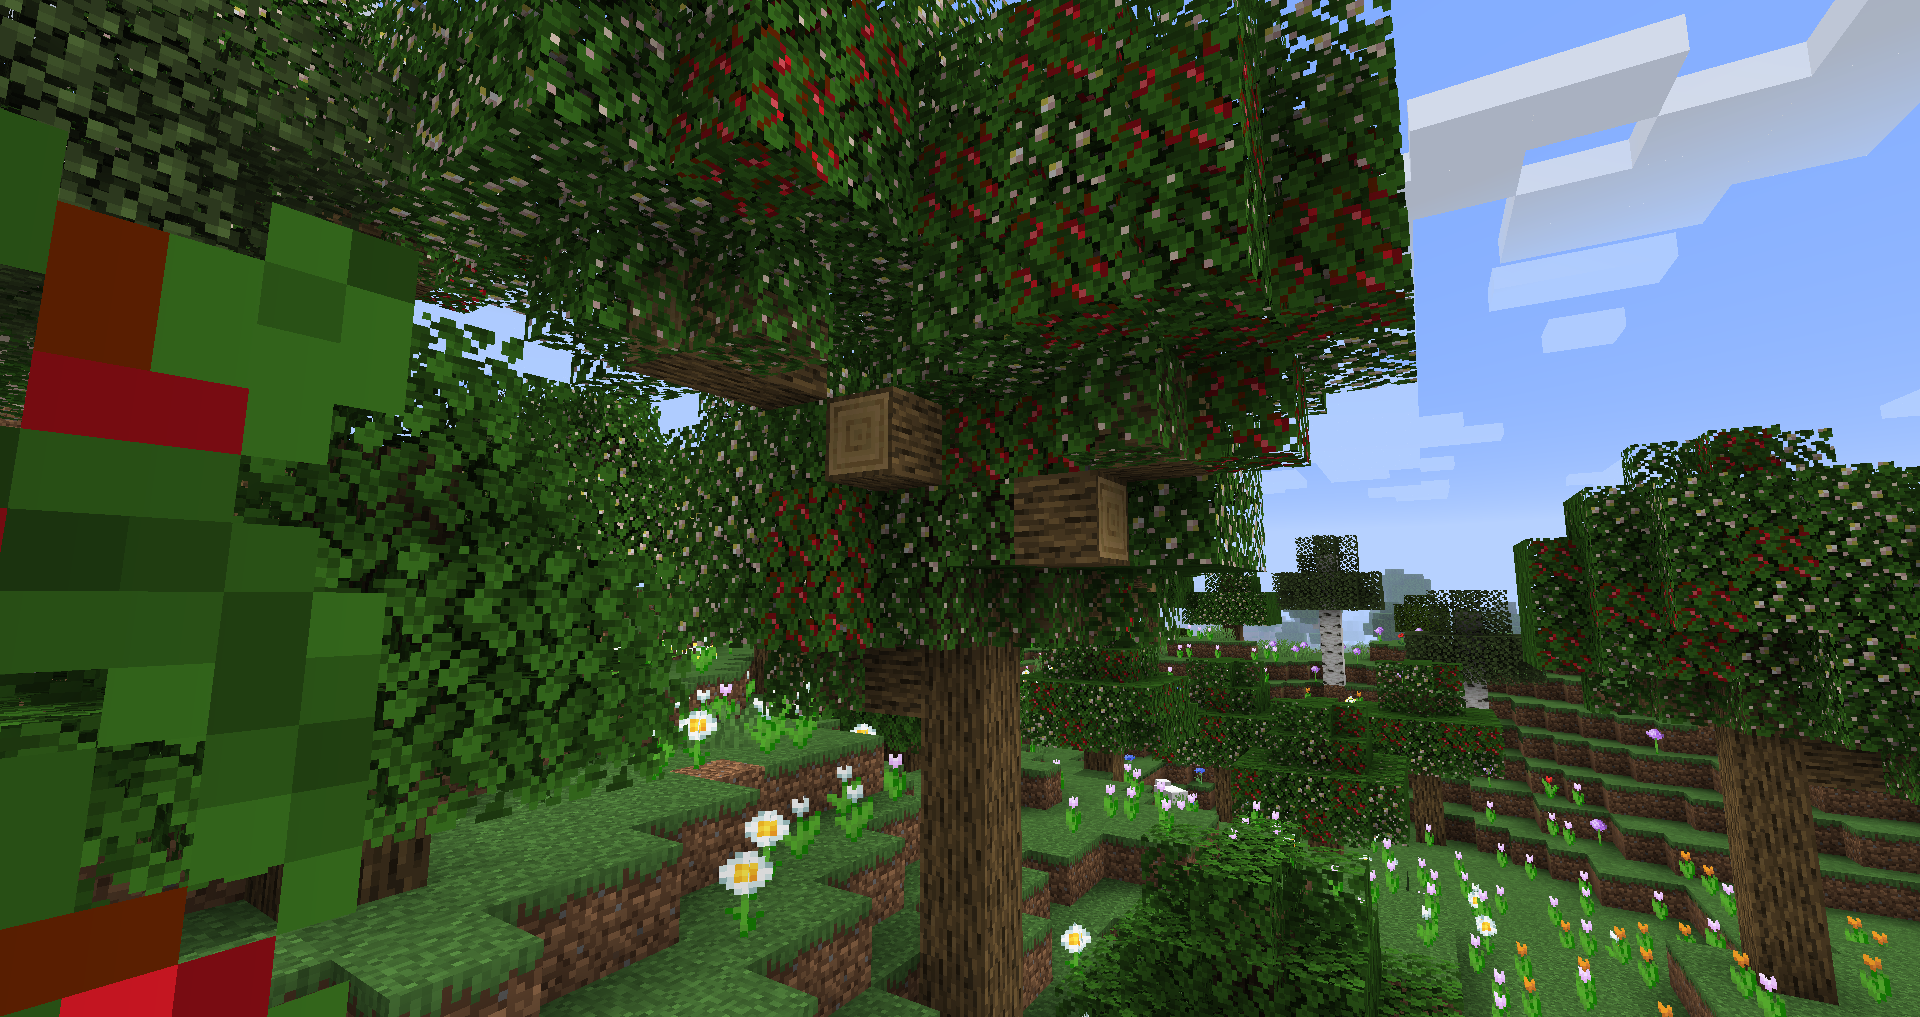 Apples hanging from trees